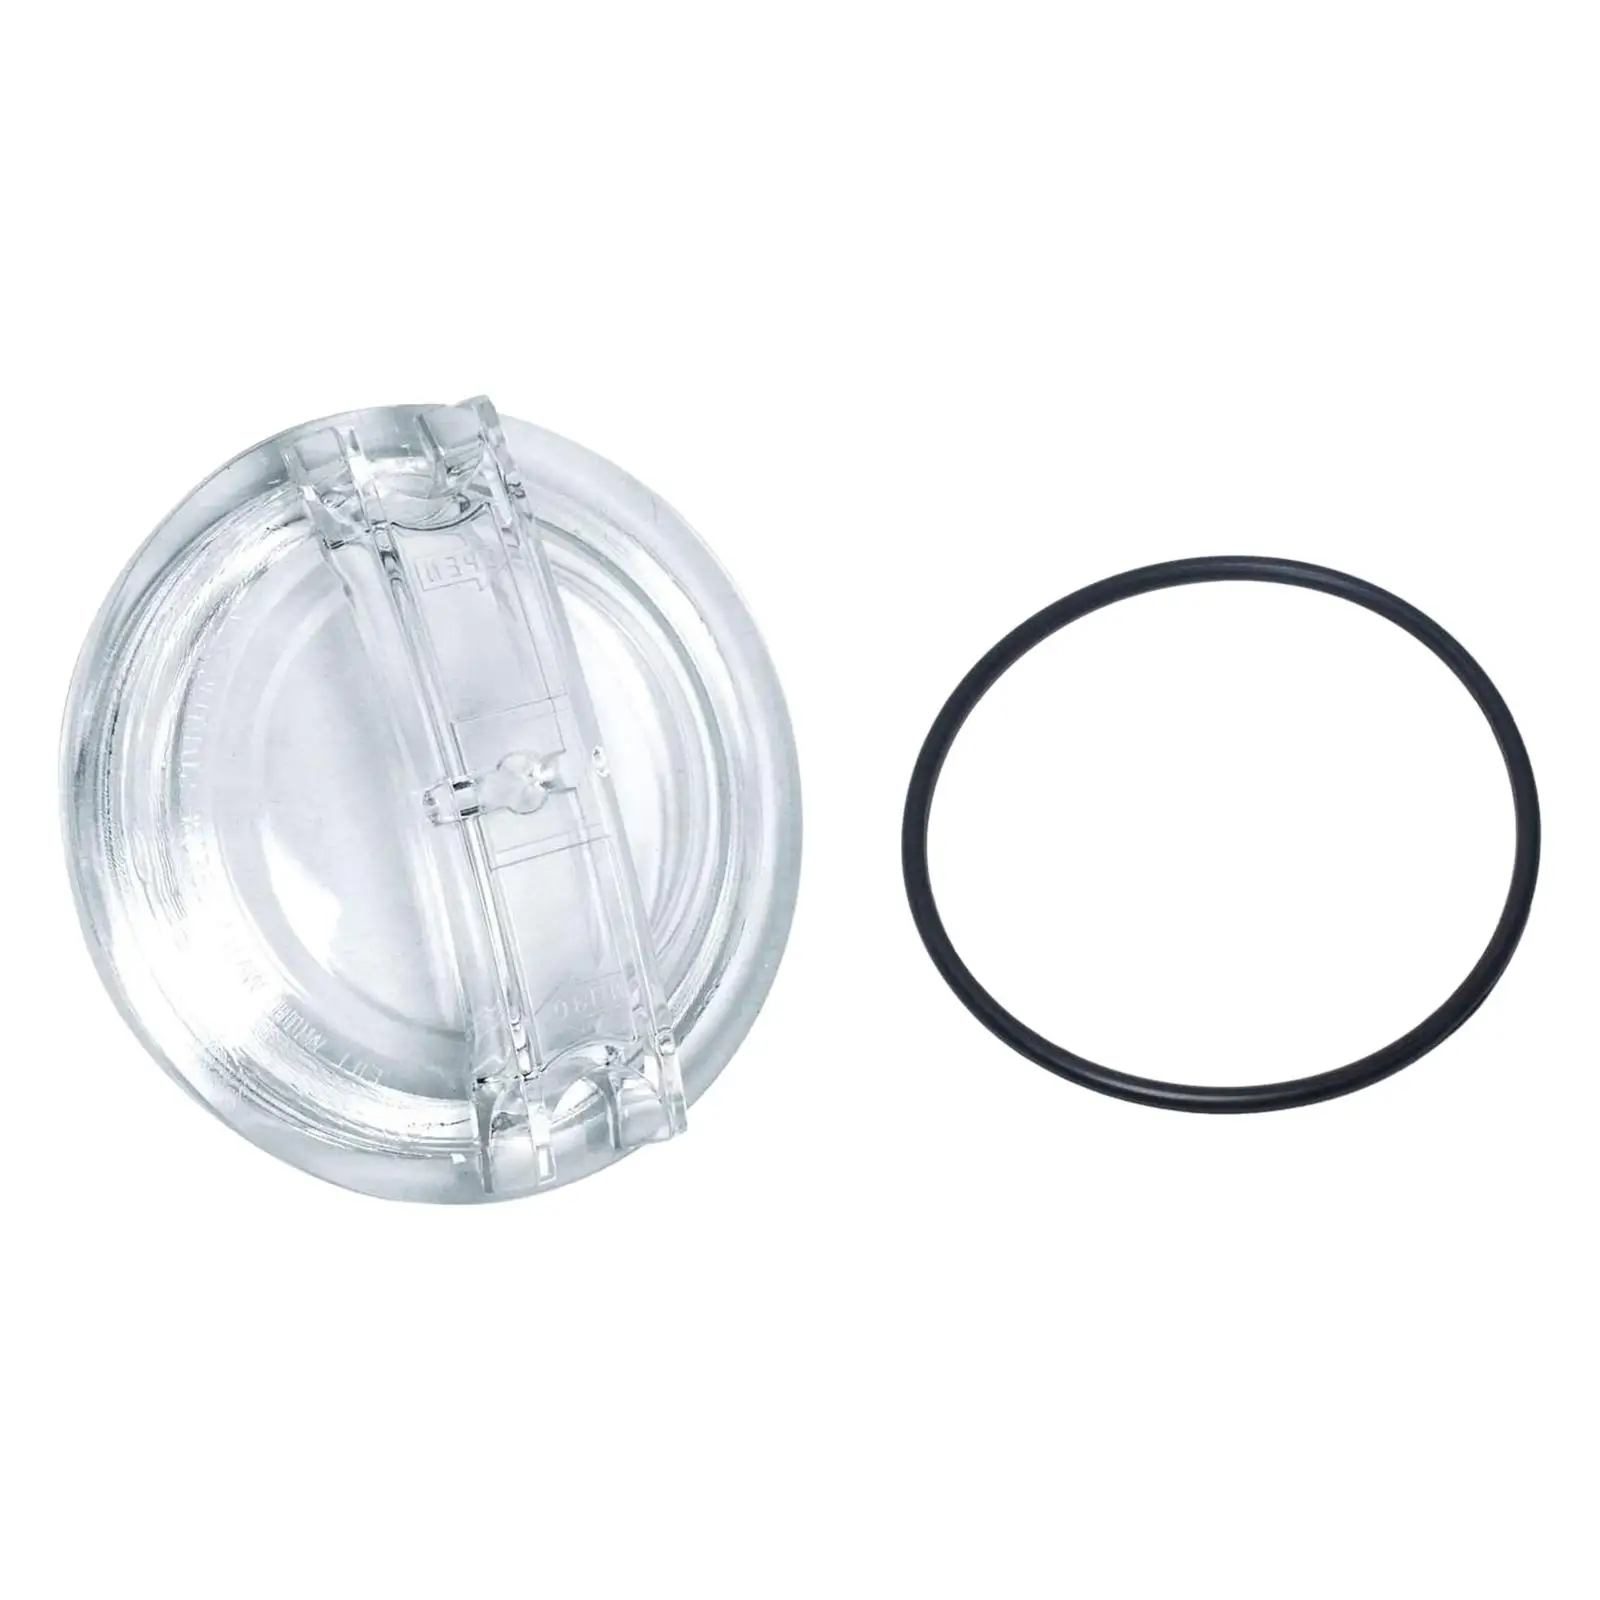 Swimming Pool Pump Strainer Lid Universal Acrylic for J20008 SP3030